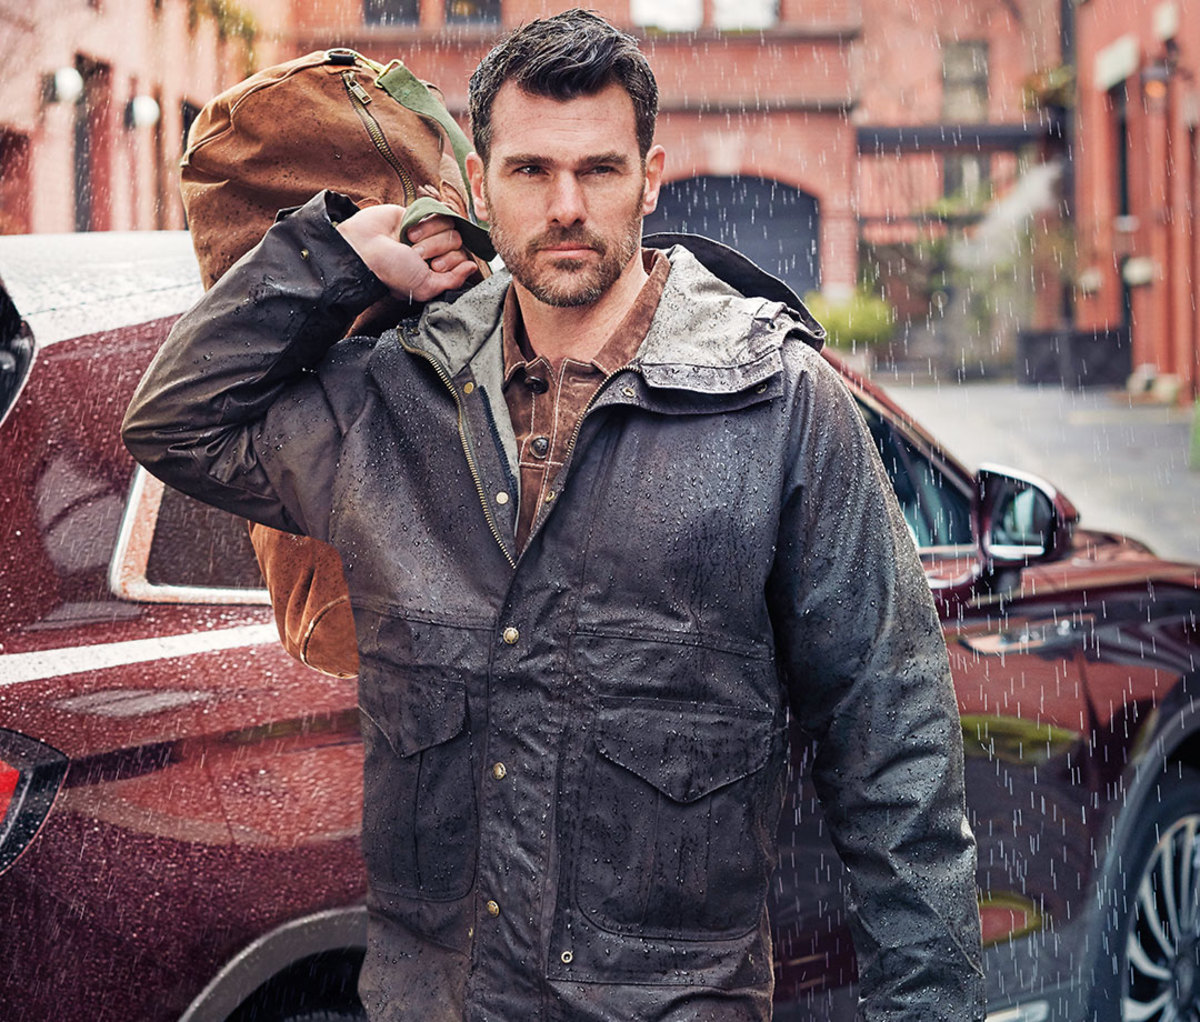 Men's Spring Style and Fashion: What to Wear When It's Raining - Men's ...